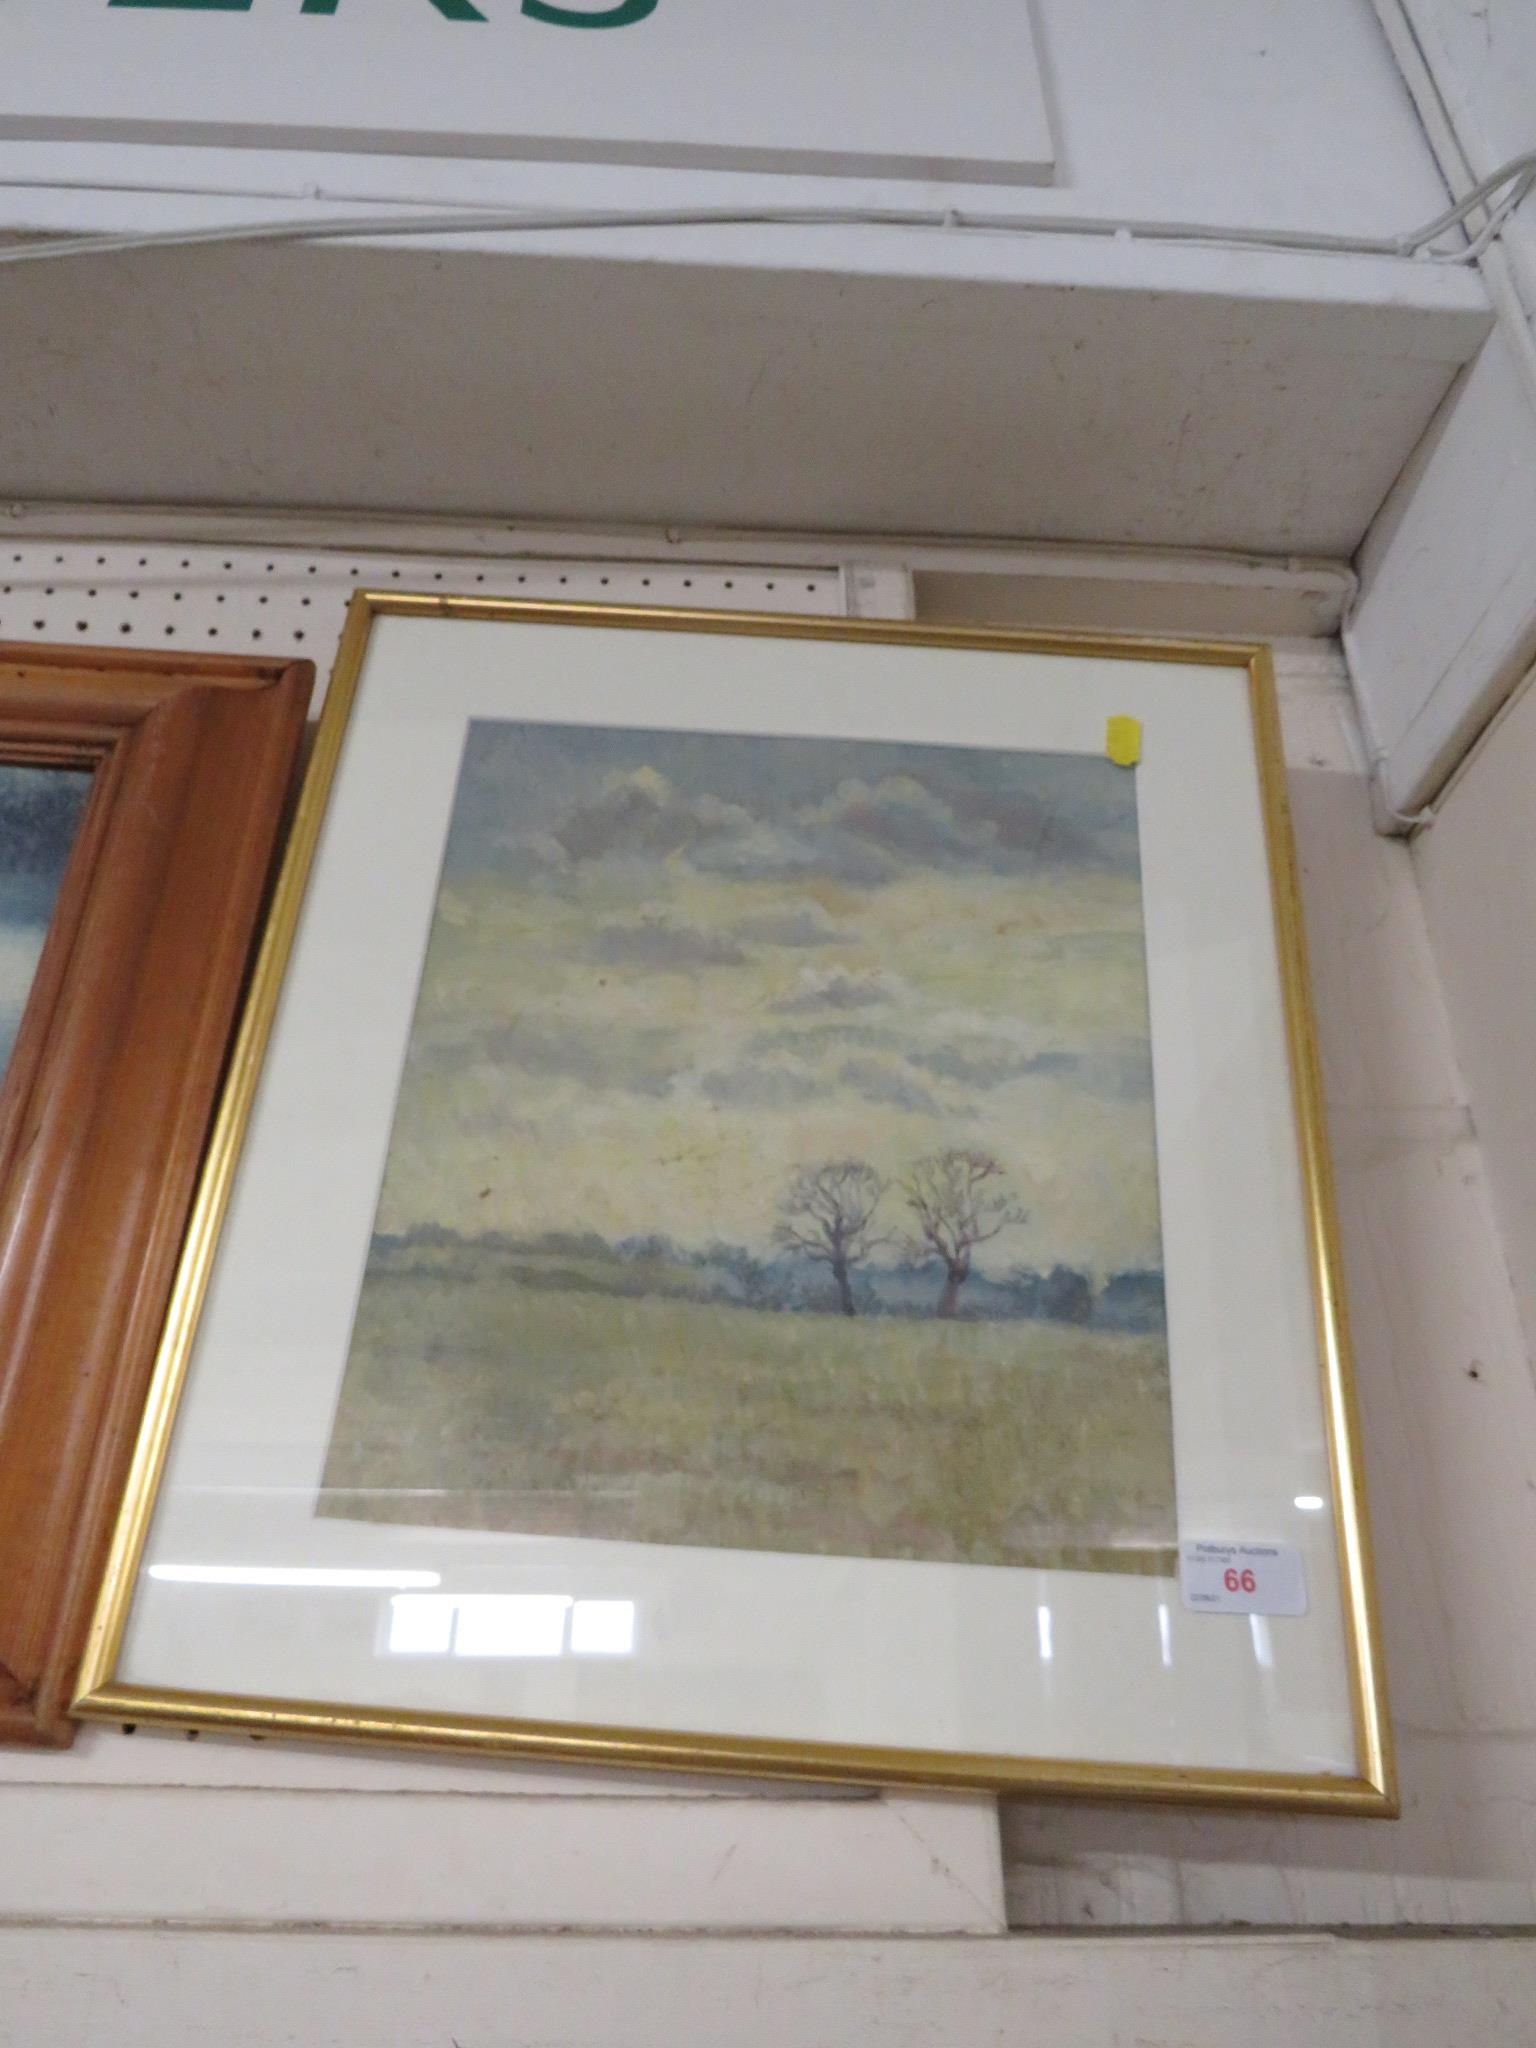 FRAMED AND GLAZED PAINTING OF TREES AND LANDSCAPE.